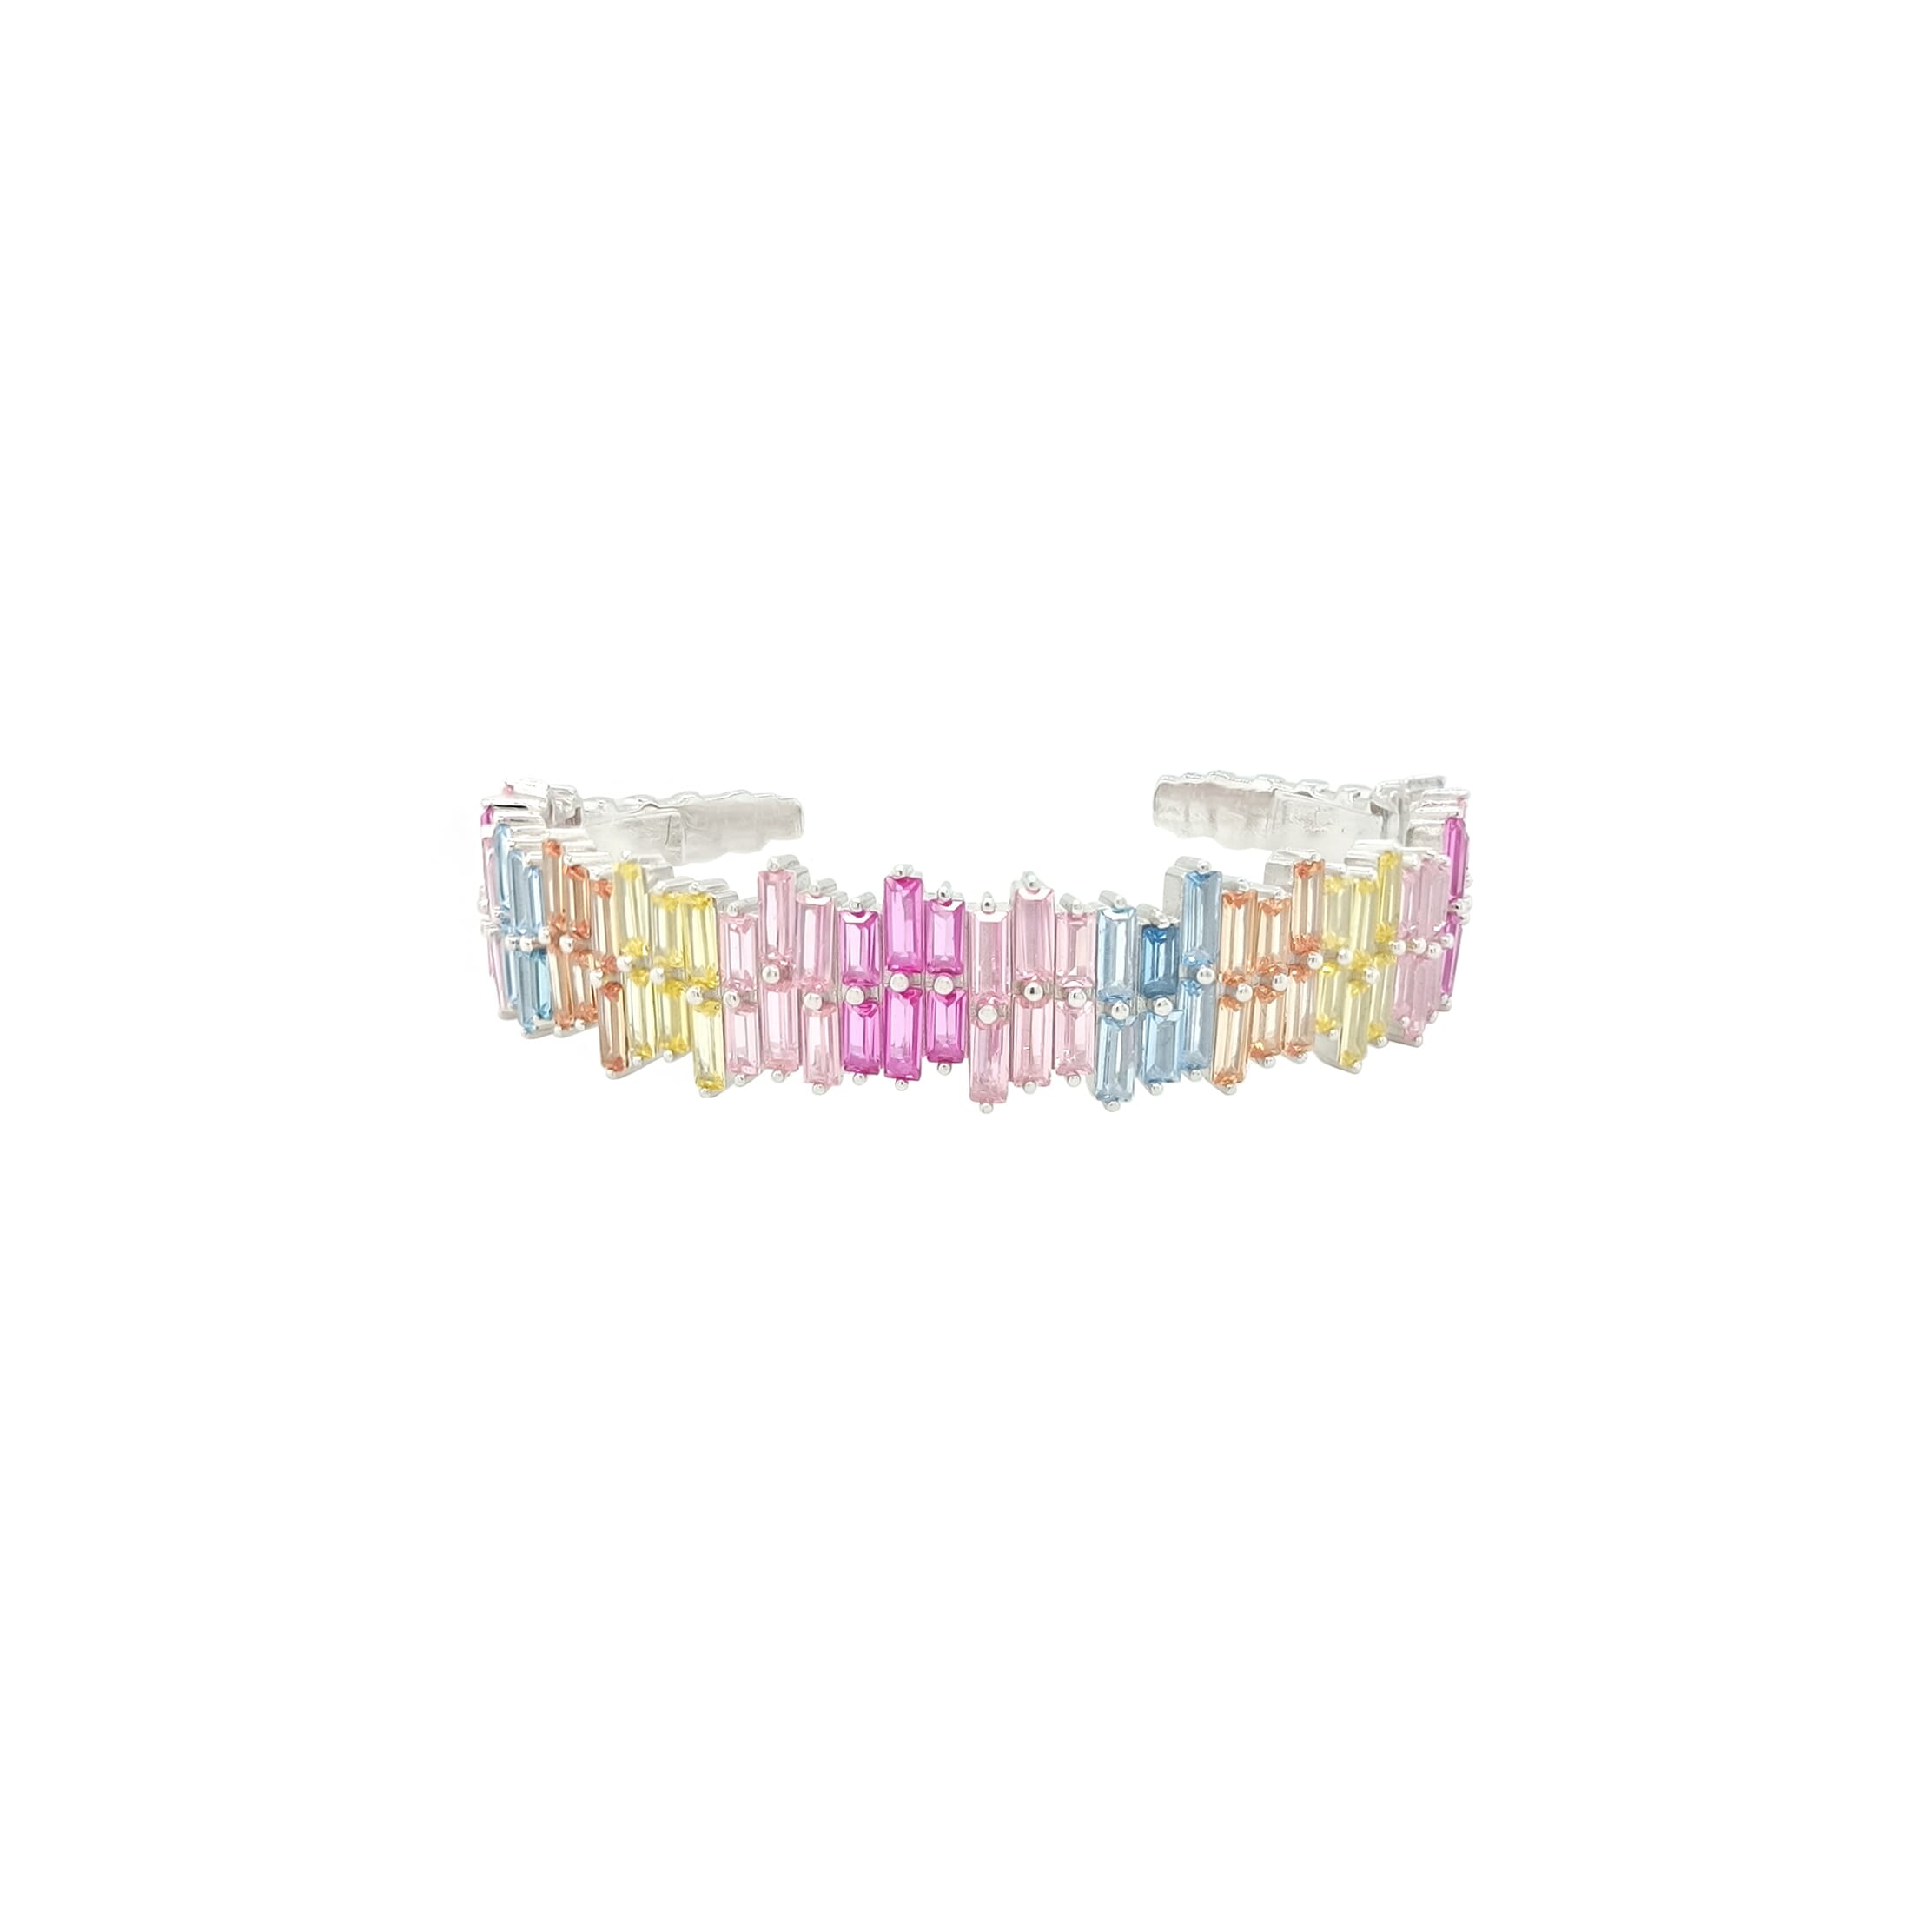 Asfour Crystal 925 Sterling Silver  Bracelet Inlaid With Multicolor Zircon Stones